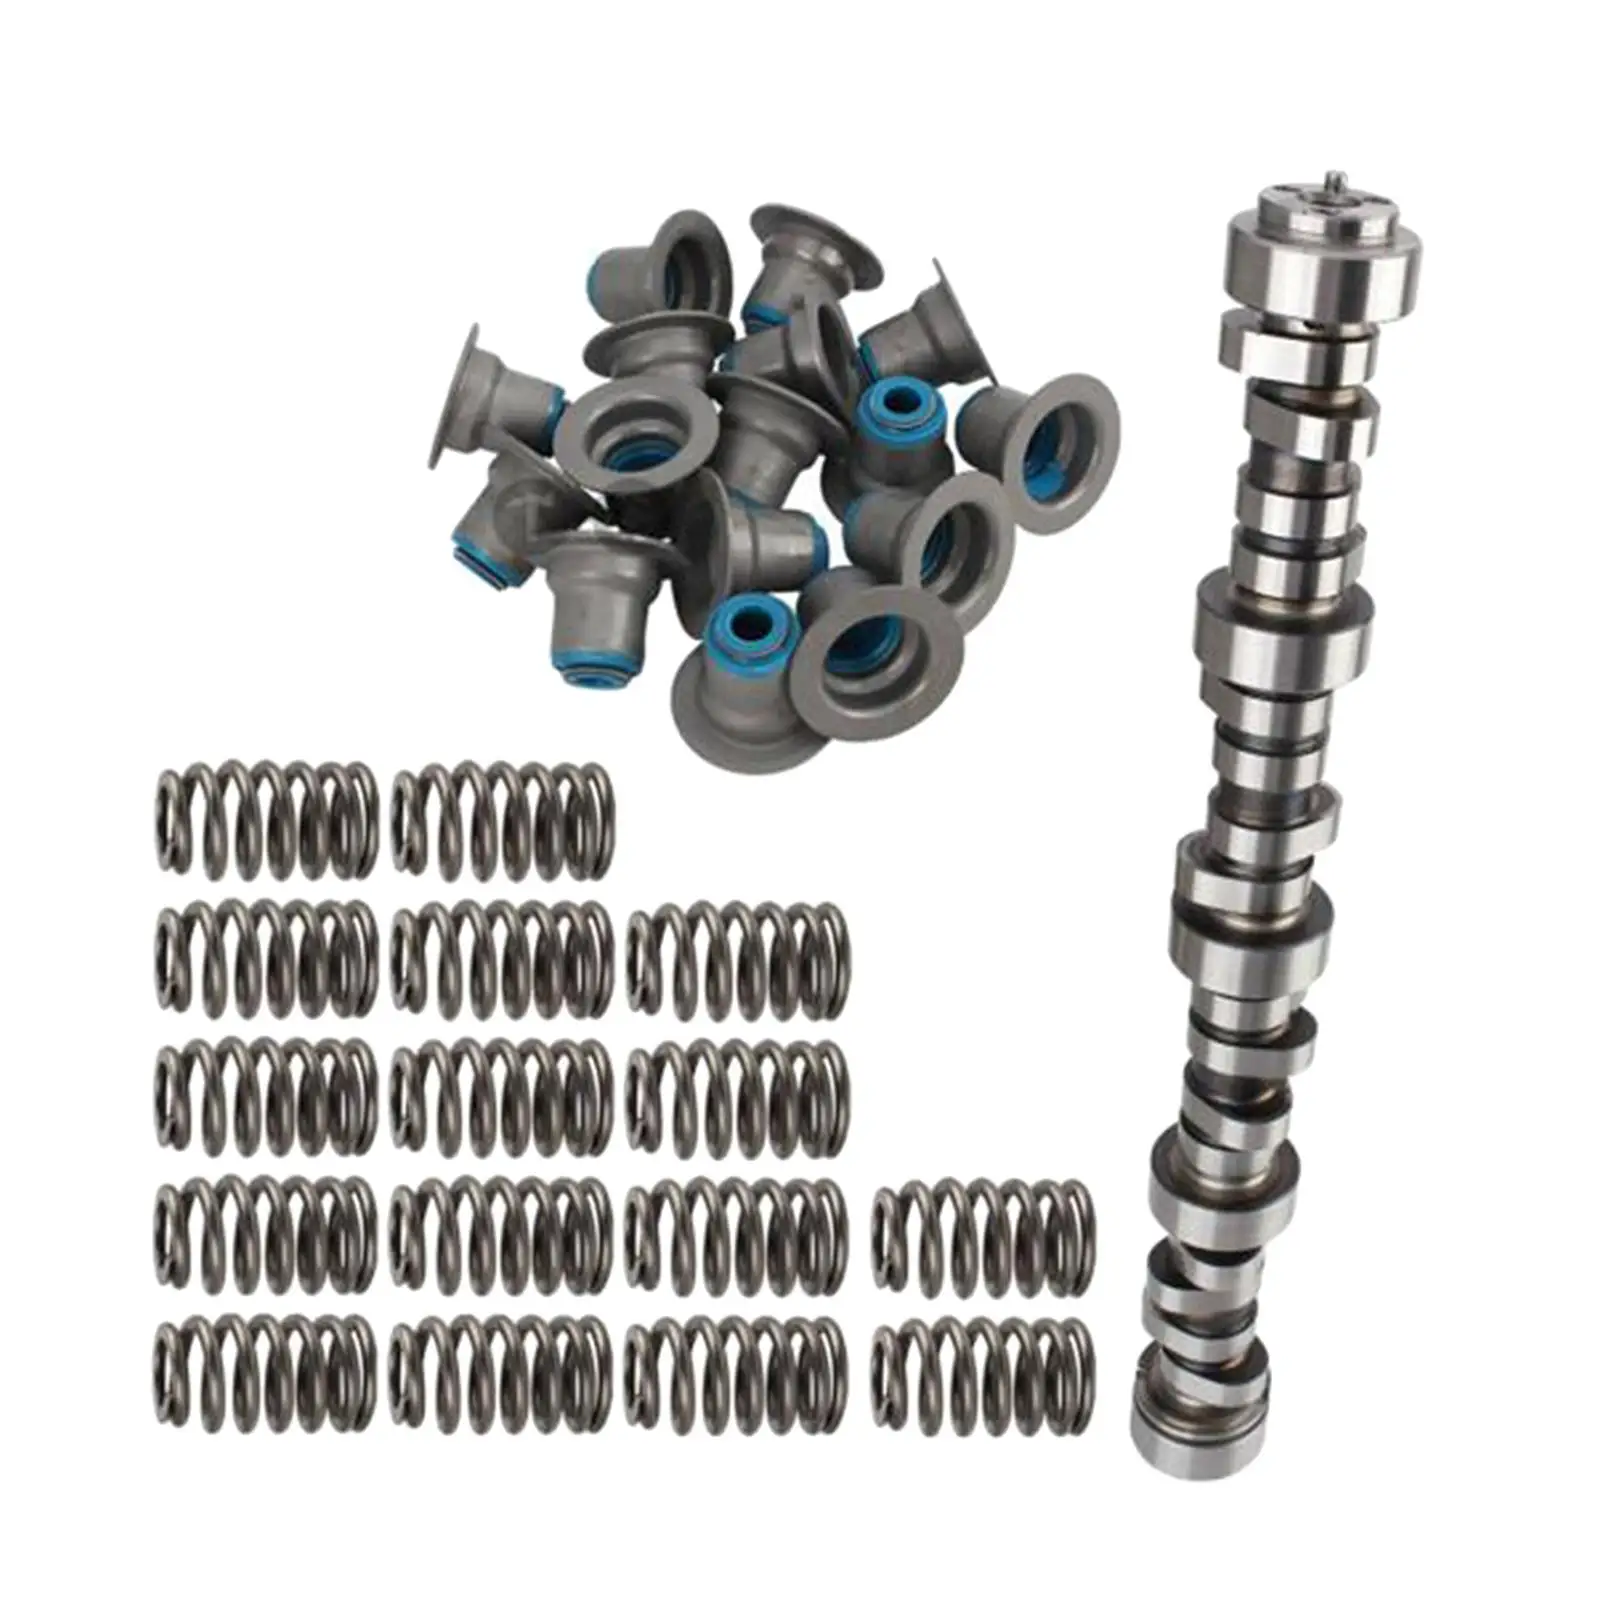 

cam Kit Btr31218110 Accessory High Quality Durable Metal Camshaft Kit Replacement for Silverado Stage 2 4.8L 5.3L 6.0L 6.2L